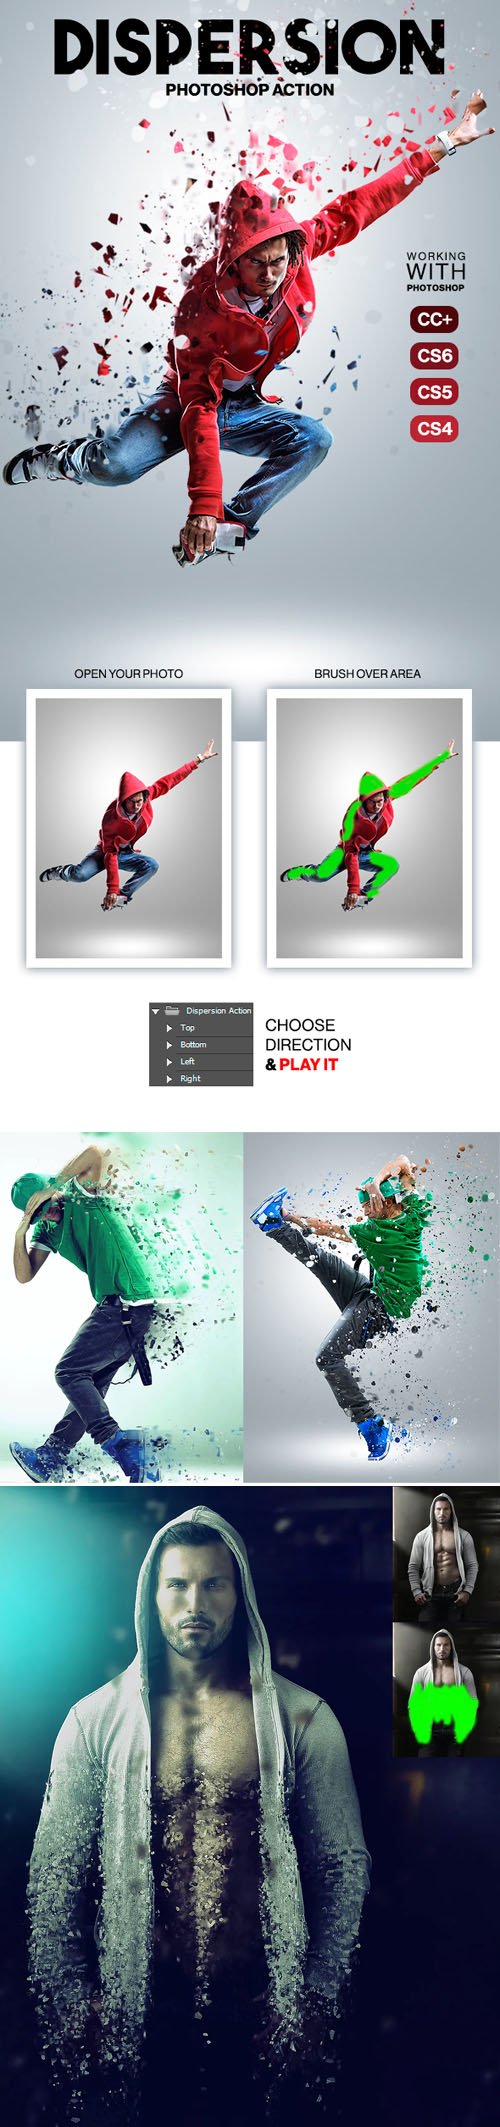 Dispersion Action for Photoshop